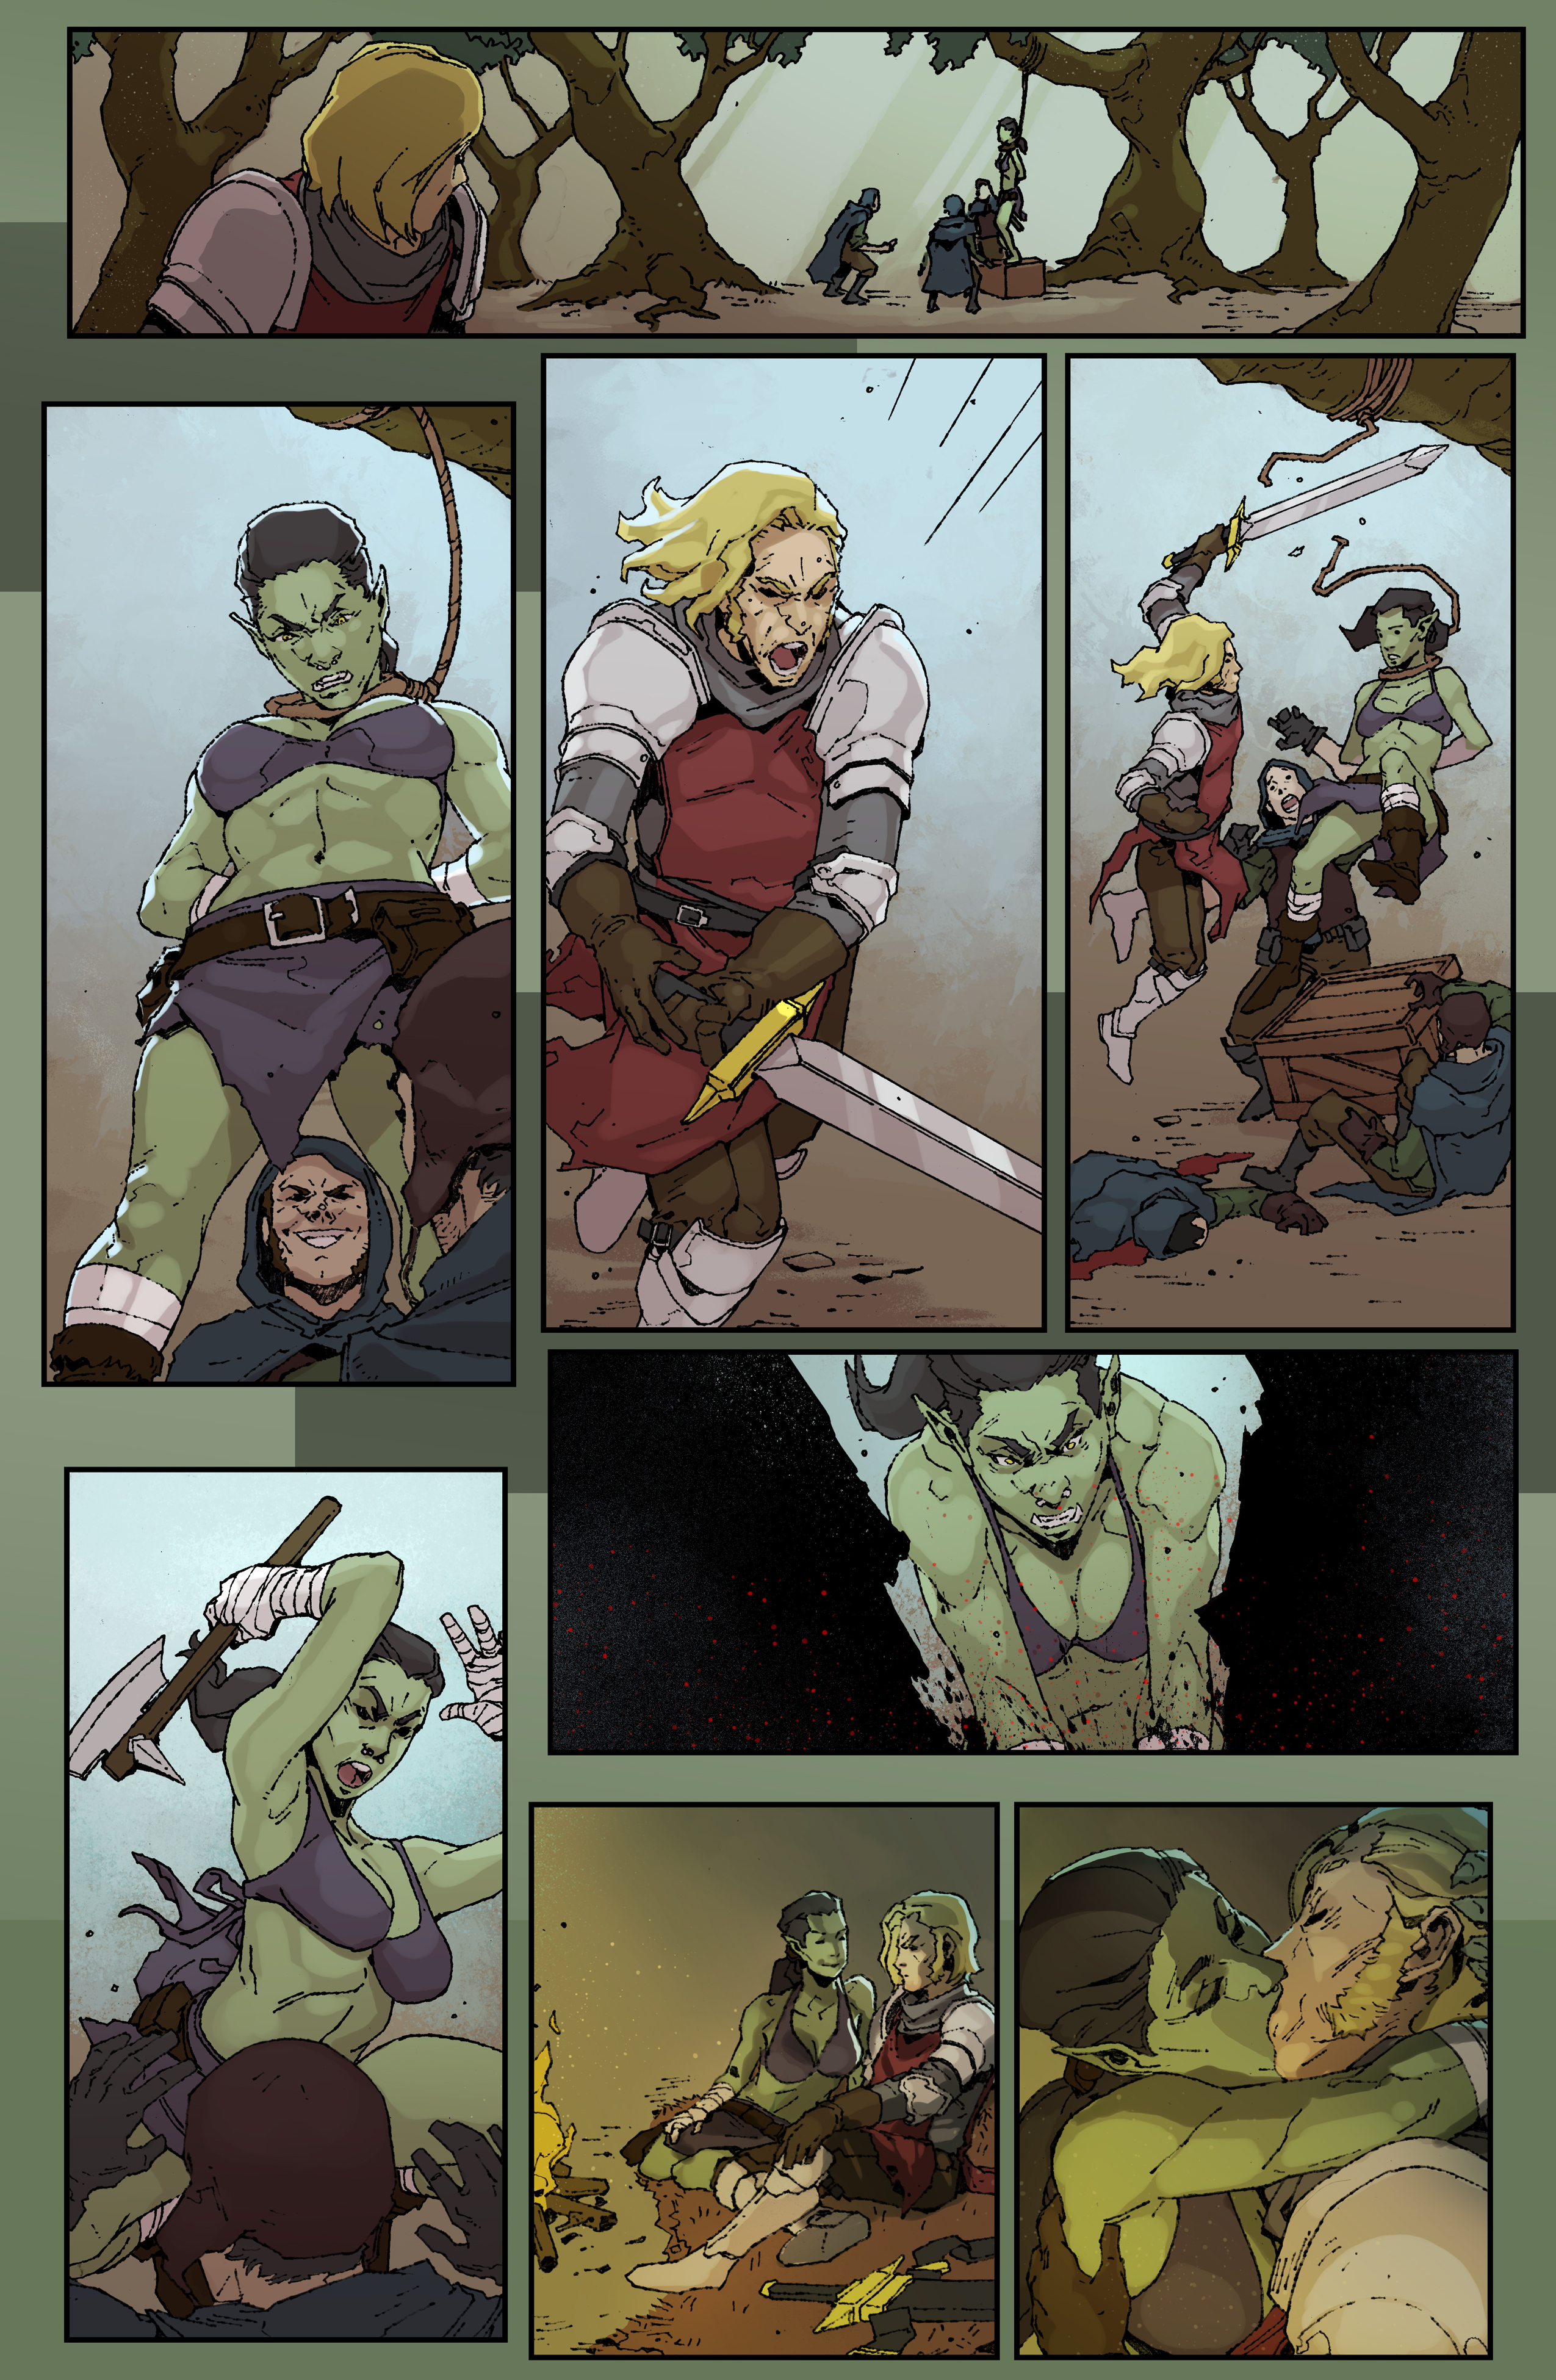 True Chivalry Pg 1 - Human Knight x Female Orc (Cheese-ter) Scrolller.